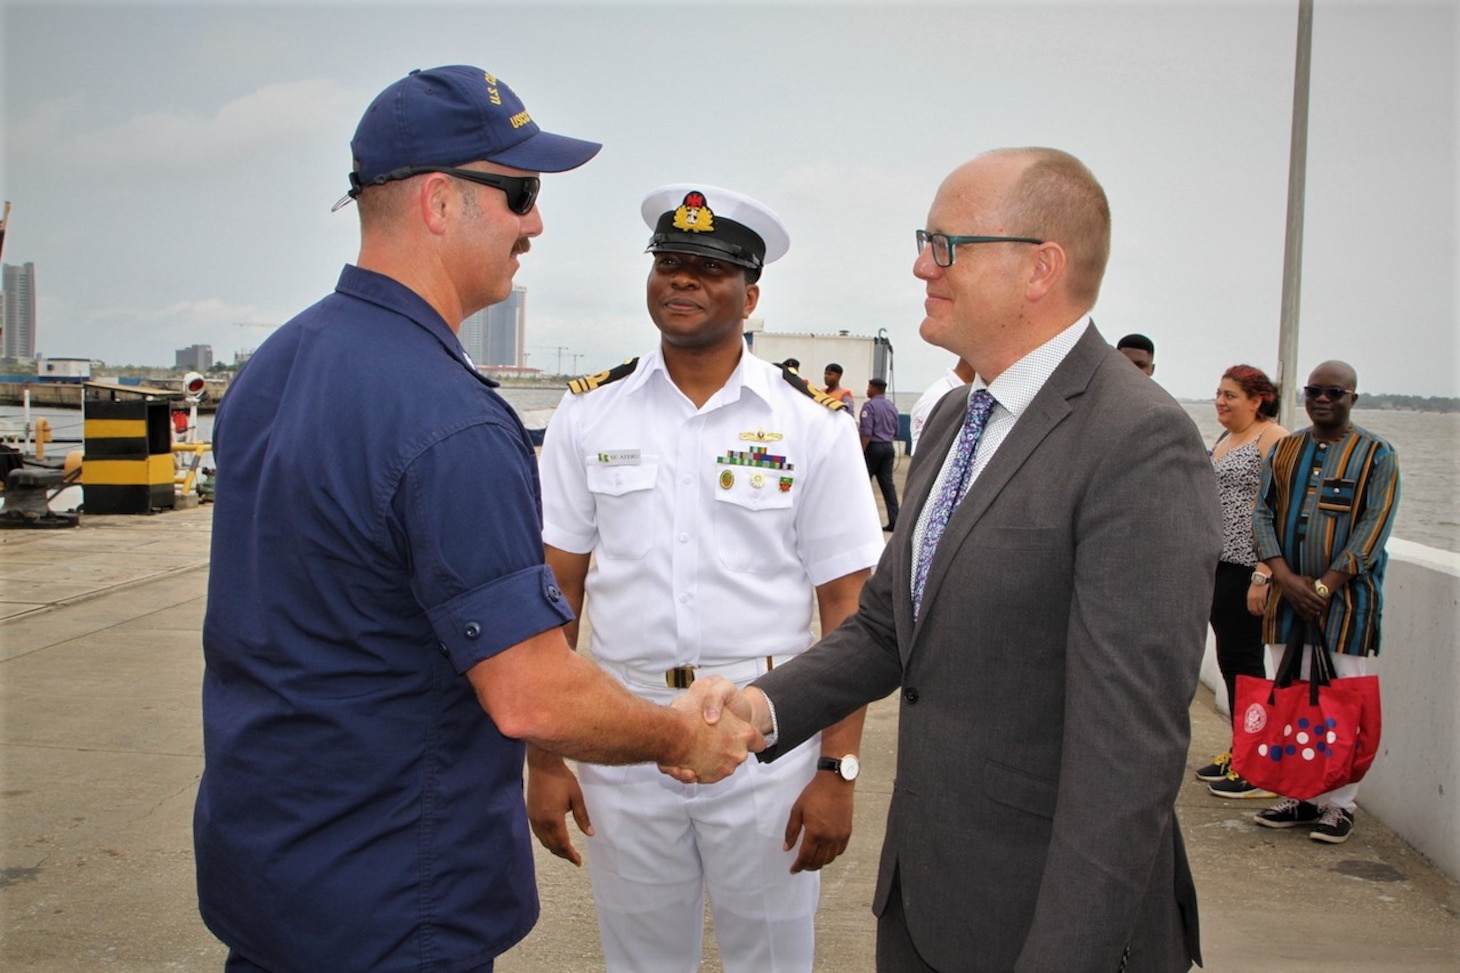 Cmdr. Andrew Pate, commanding officer of the Famous-class medium endurance cutter USCGC Mohawk (WMEC 913), left,  meets with U.S. Consul General Will Stevens, right, and Nigerian Navy Lt. Cmdr. S. Ateru, Western Navy Command liaison officer, during a scheduled port visit in Lagos, Nigeria, Aug. 18, 2022.